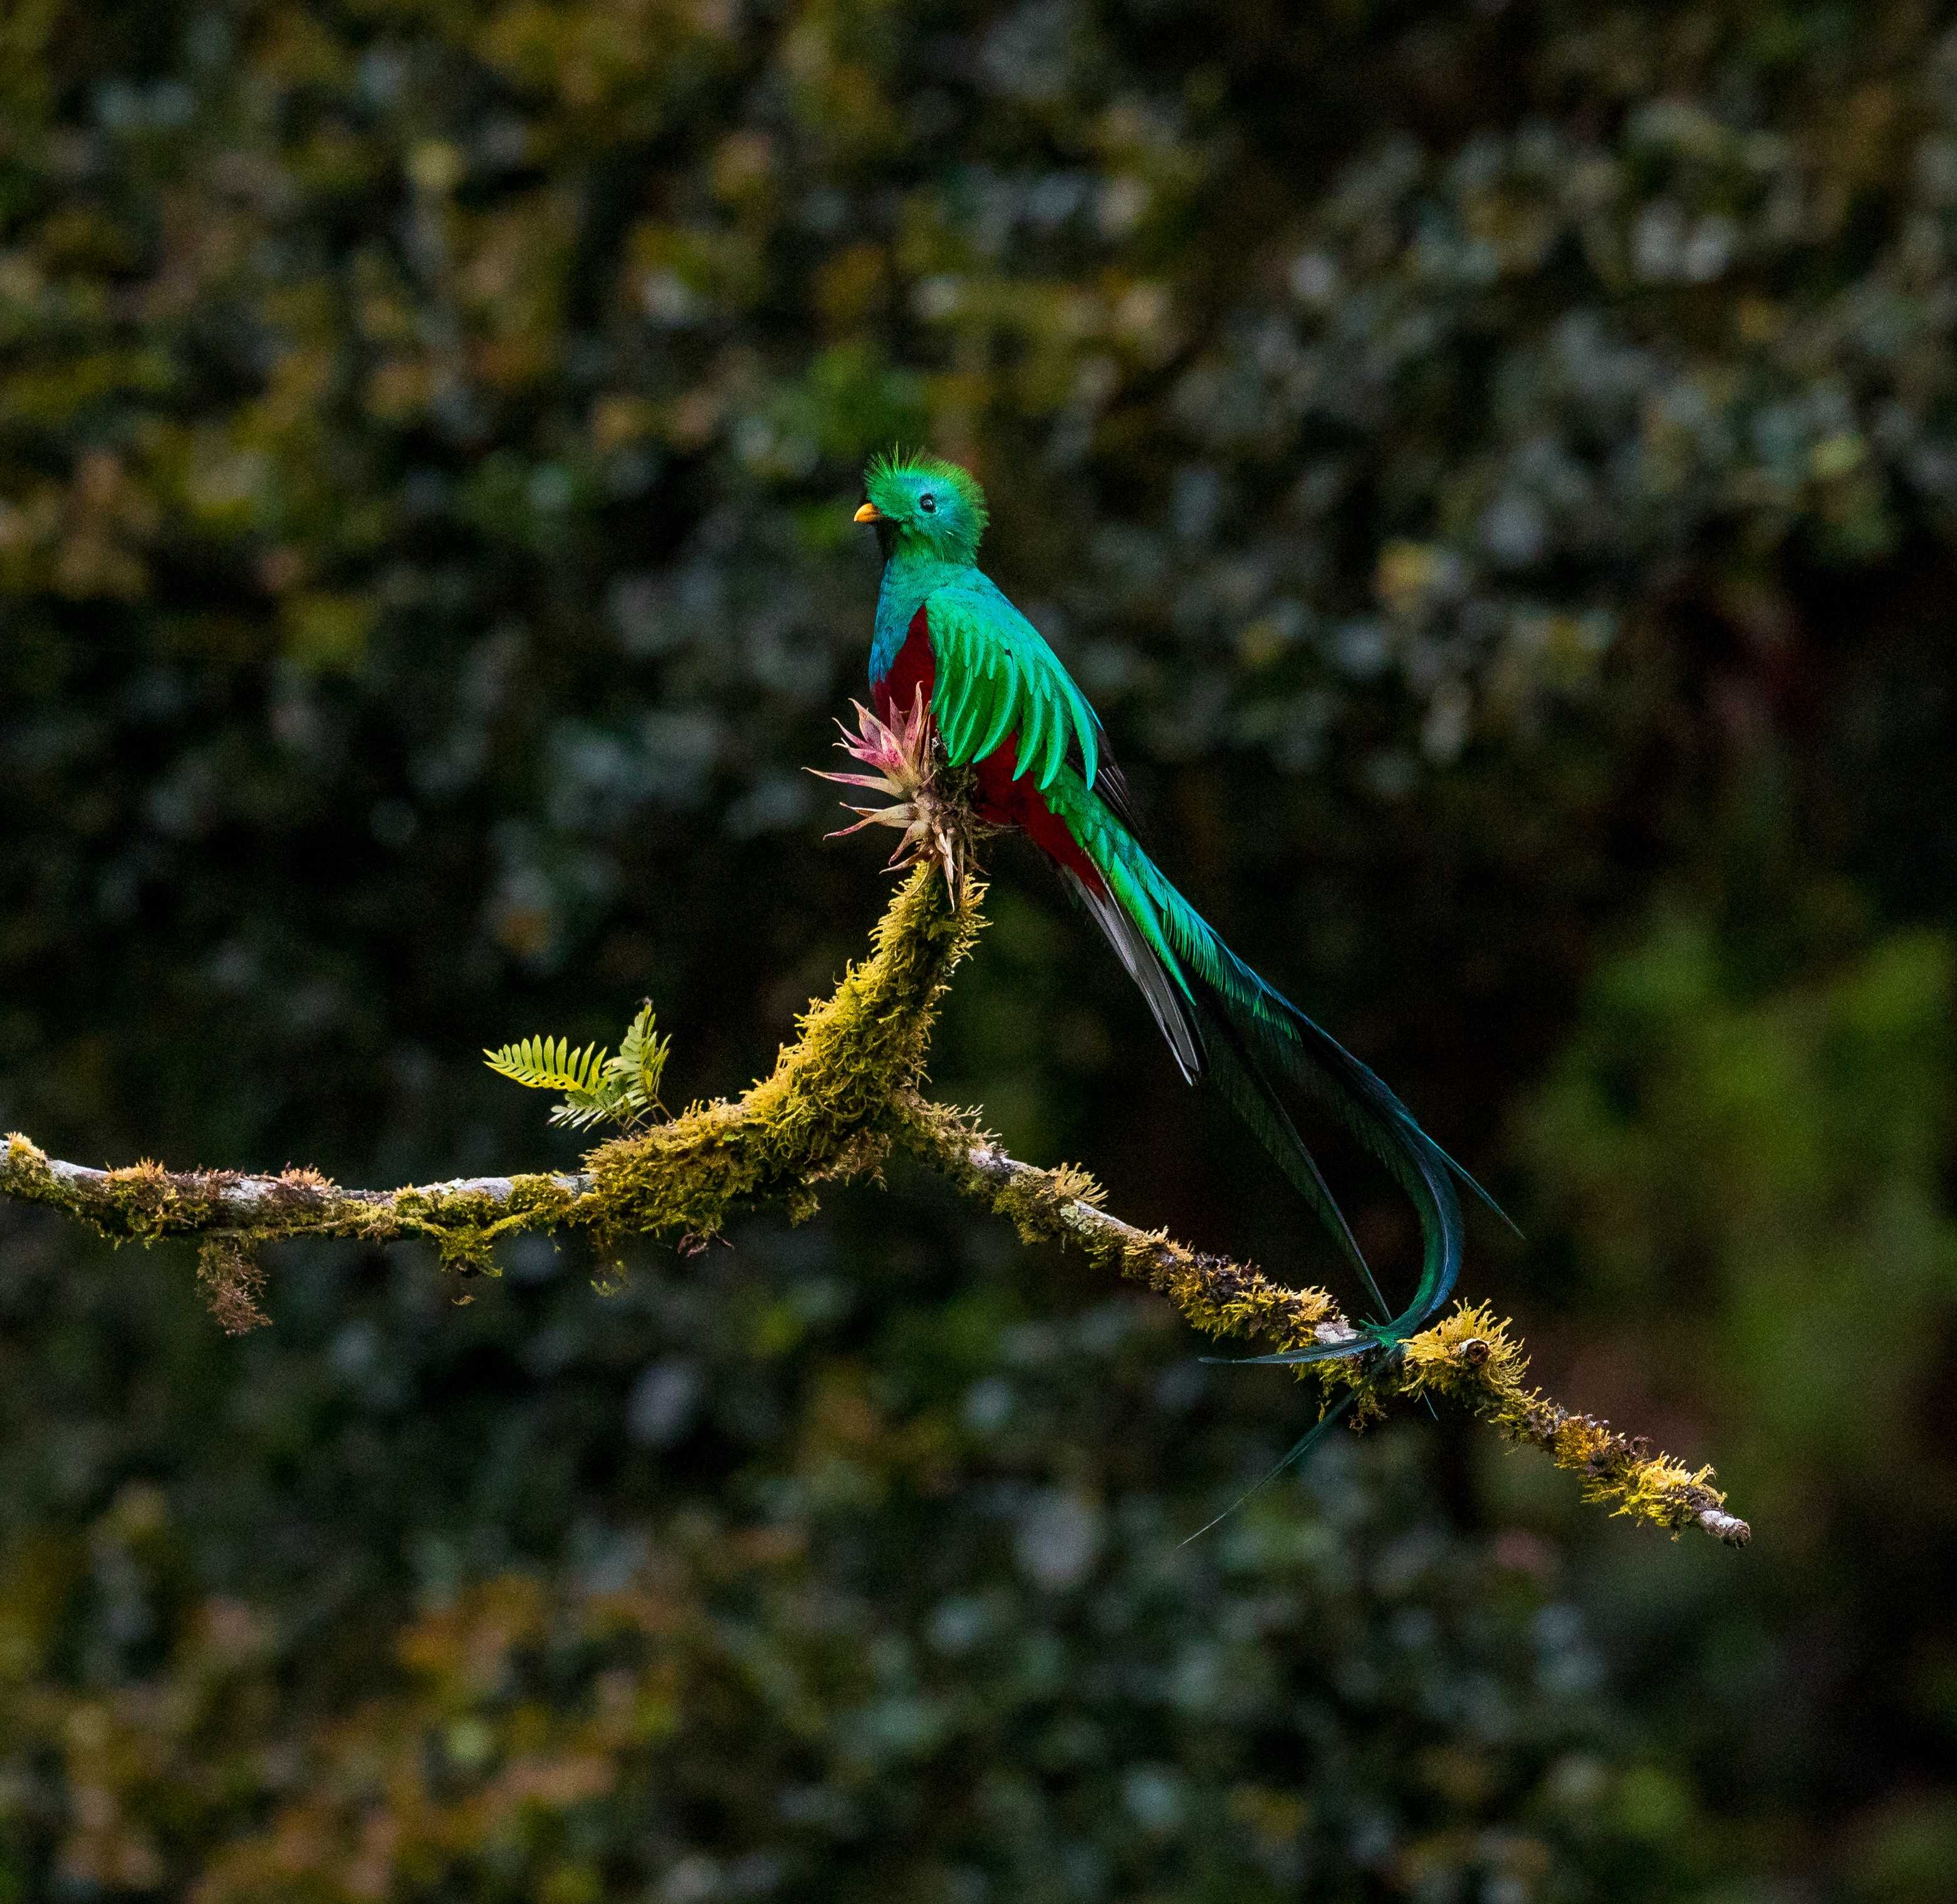 A quetzal bird standing on the branch of a tree